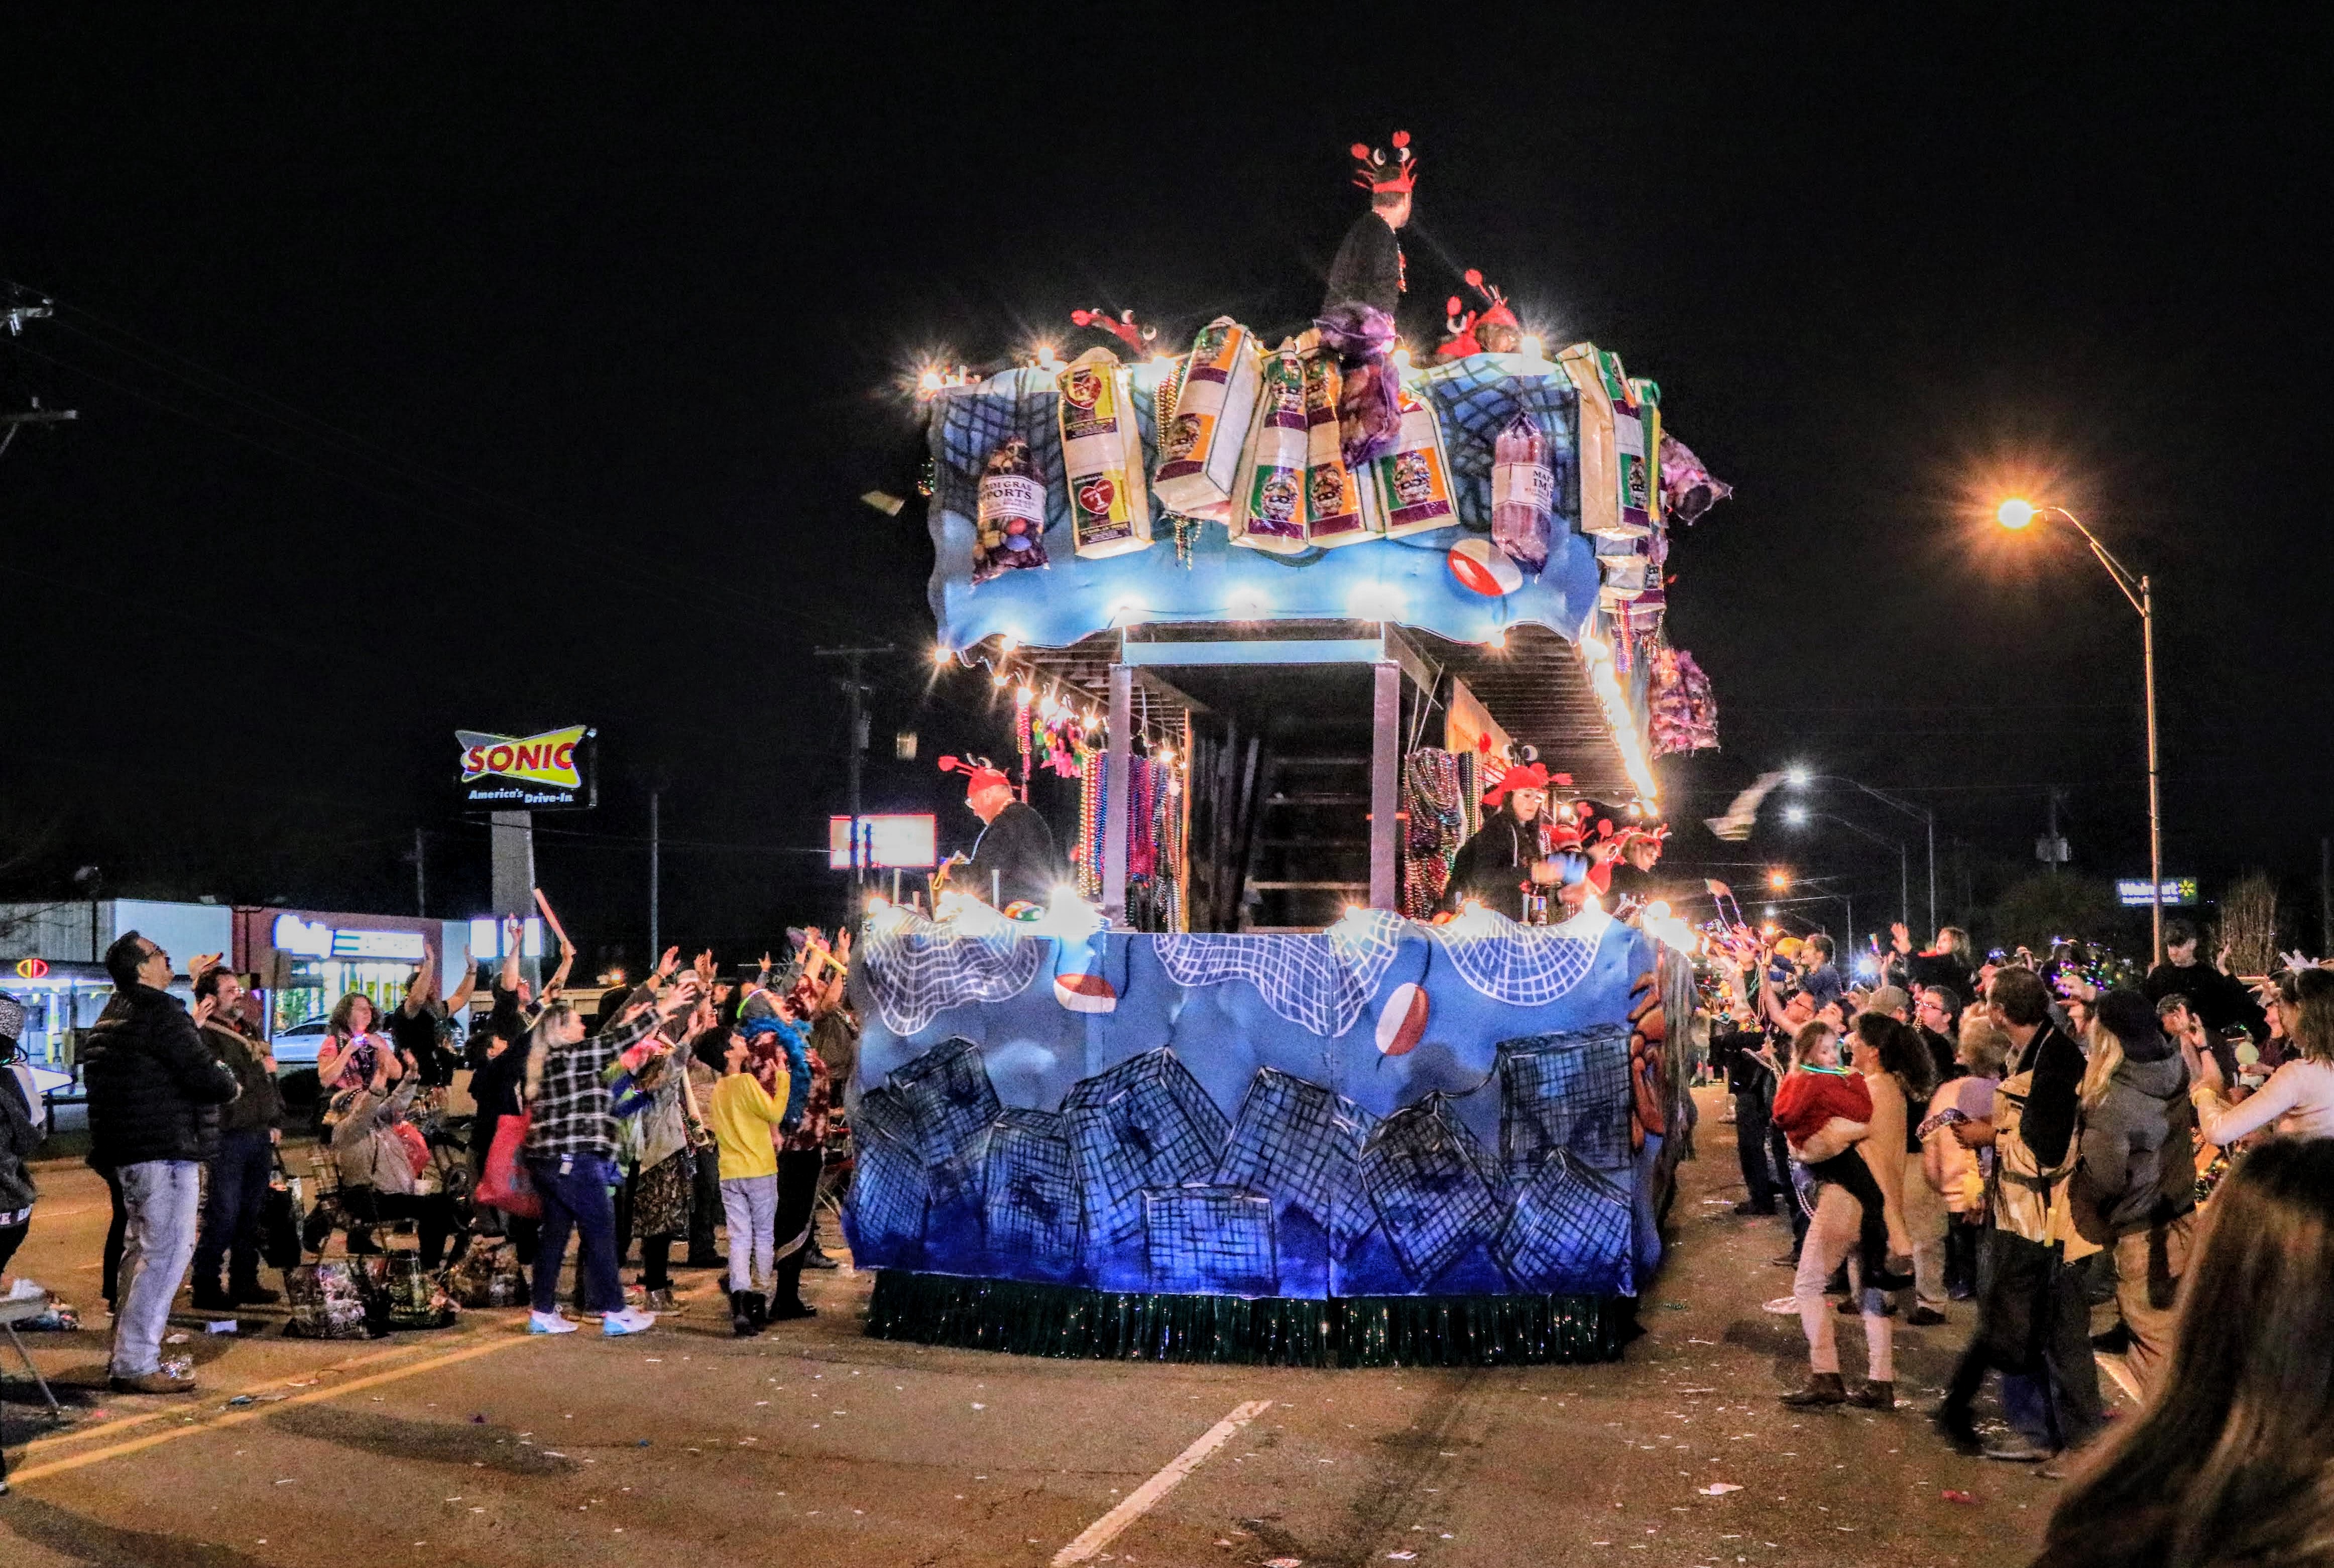 Mardi Gras revelers let the good times roll in Portsmouth